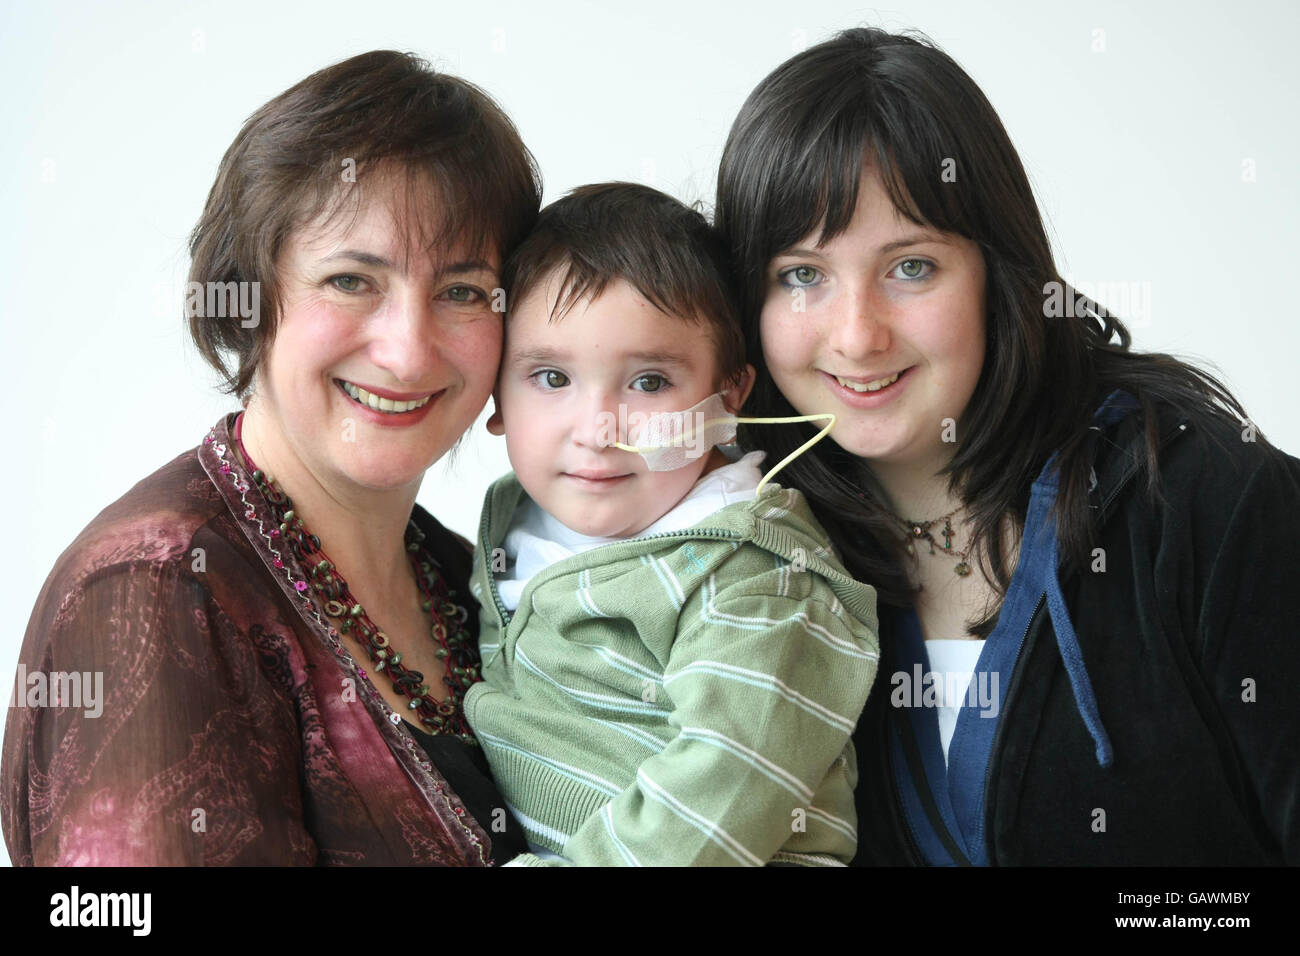 Anette Kinne with her son Alexander, 3, and daughter Genevive, 15, at the launch of RehabCare's investigative report into the social support needs of families who experience rare disorders on the island of Ireland, at the Science Gallery, Naughton Institute, Trinity College, Dublin, today. Stock Photo